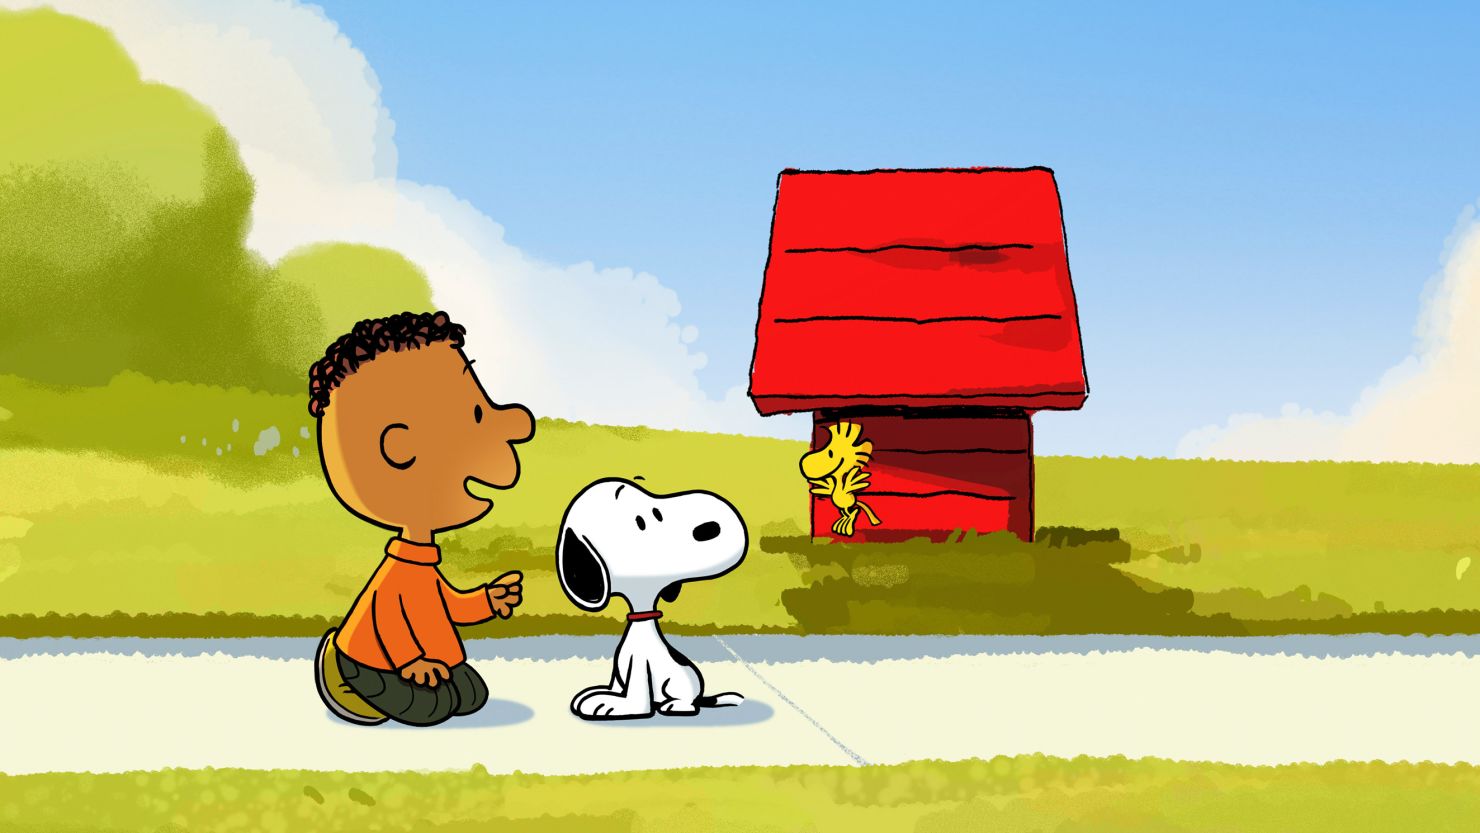 ‘Snoopy Presents Home, Franklin’ Black character gets his